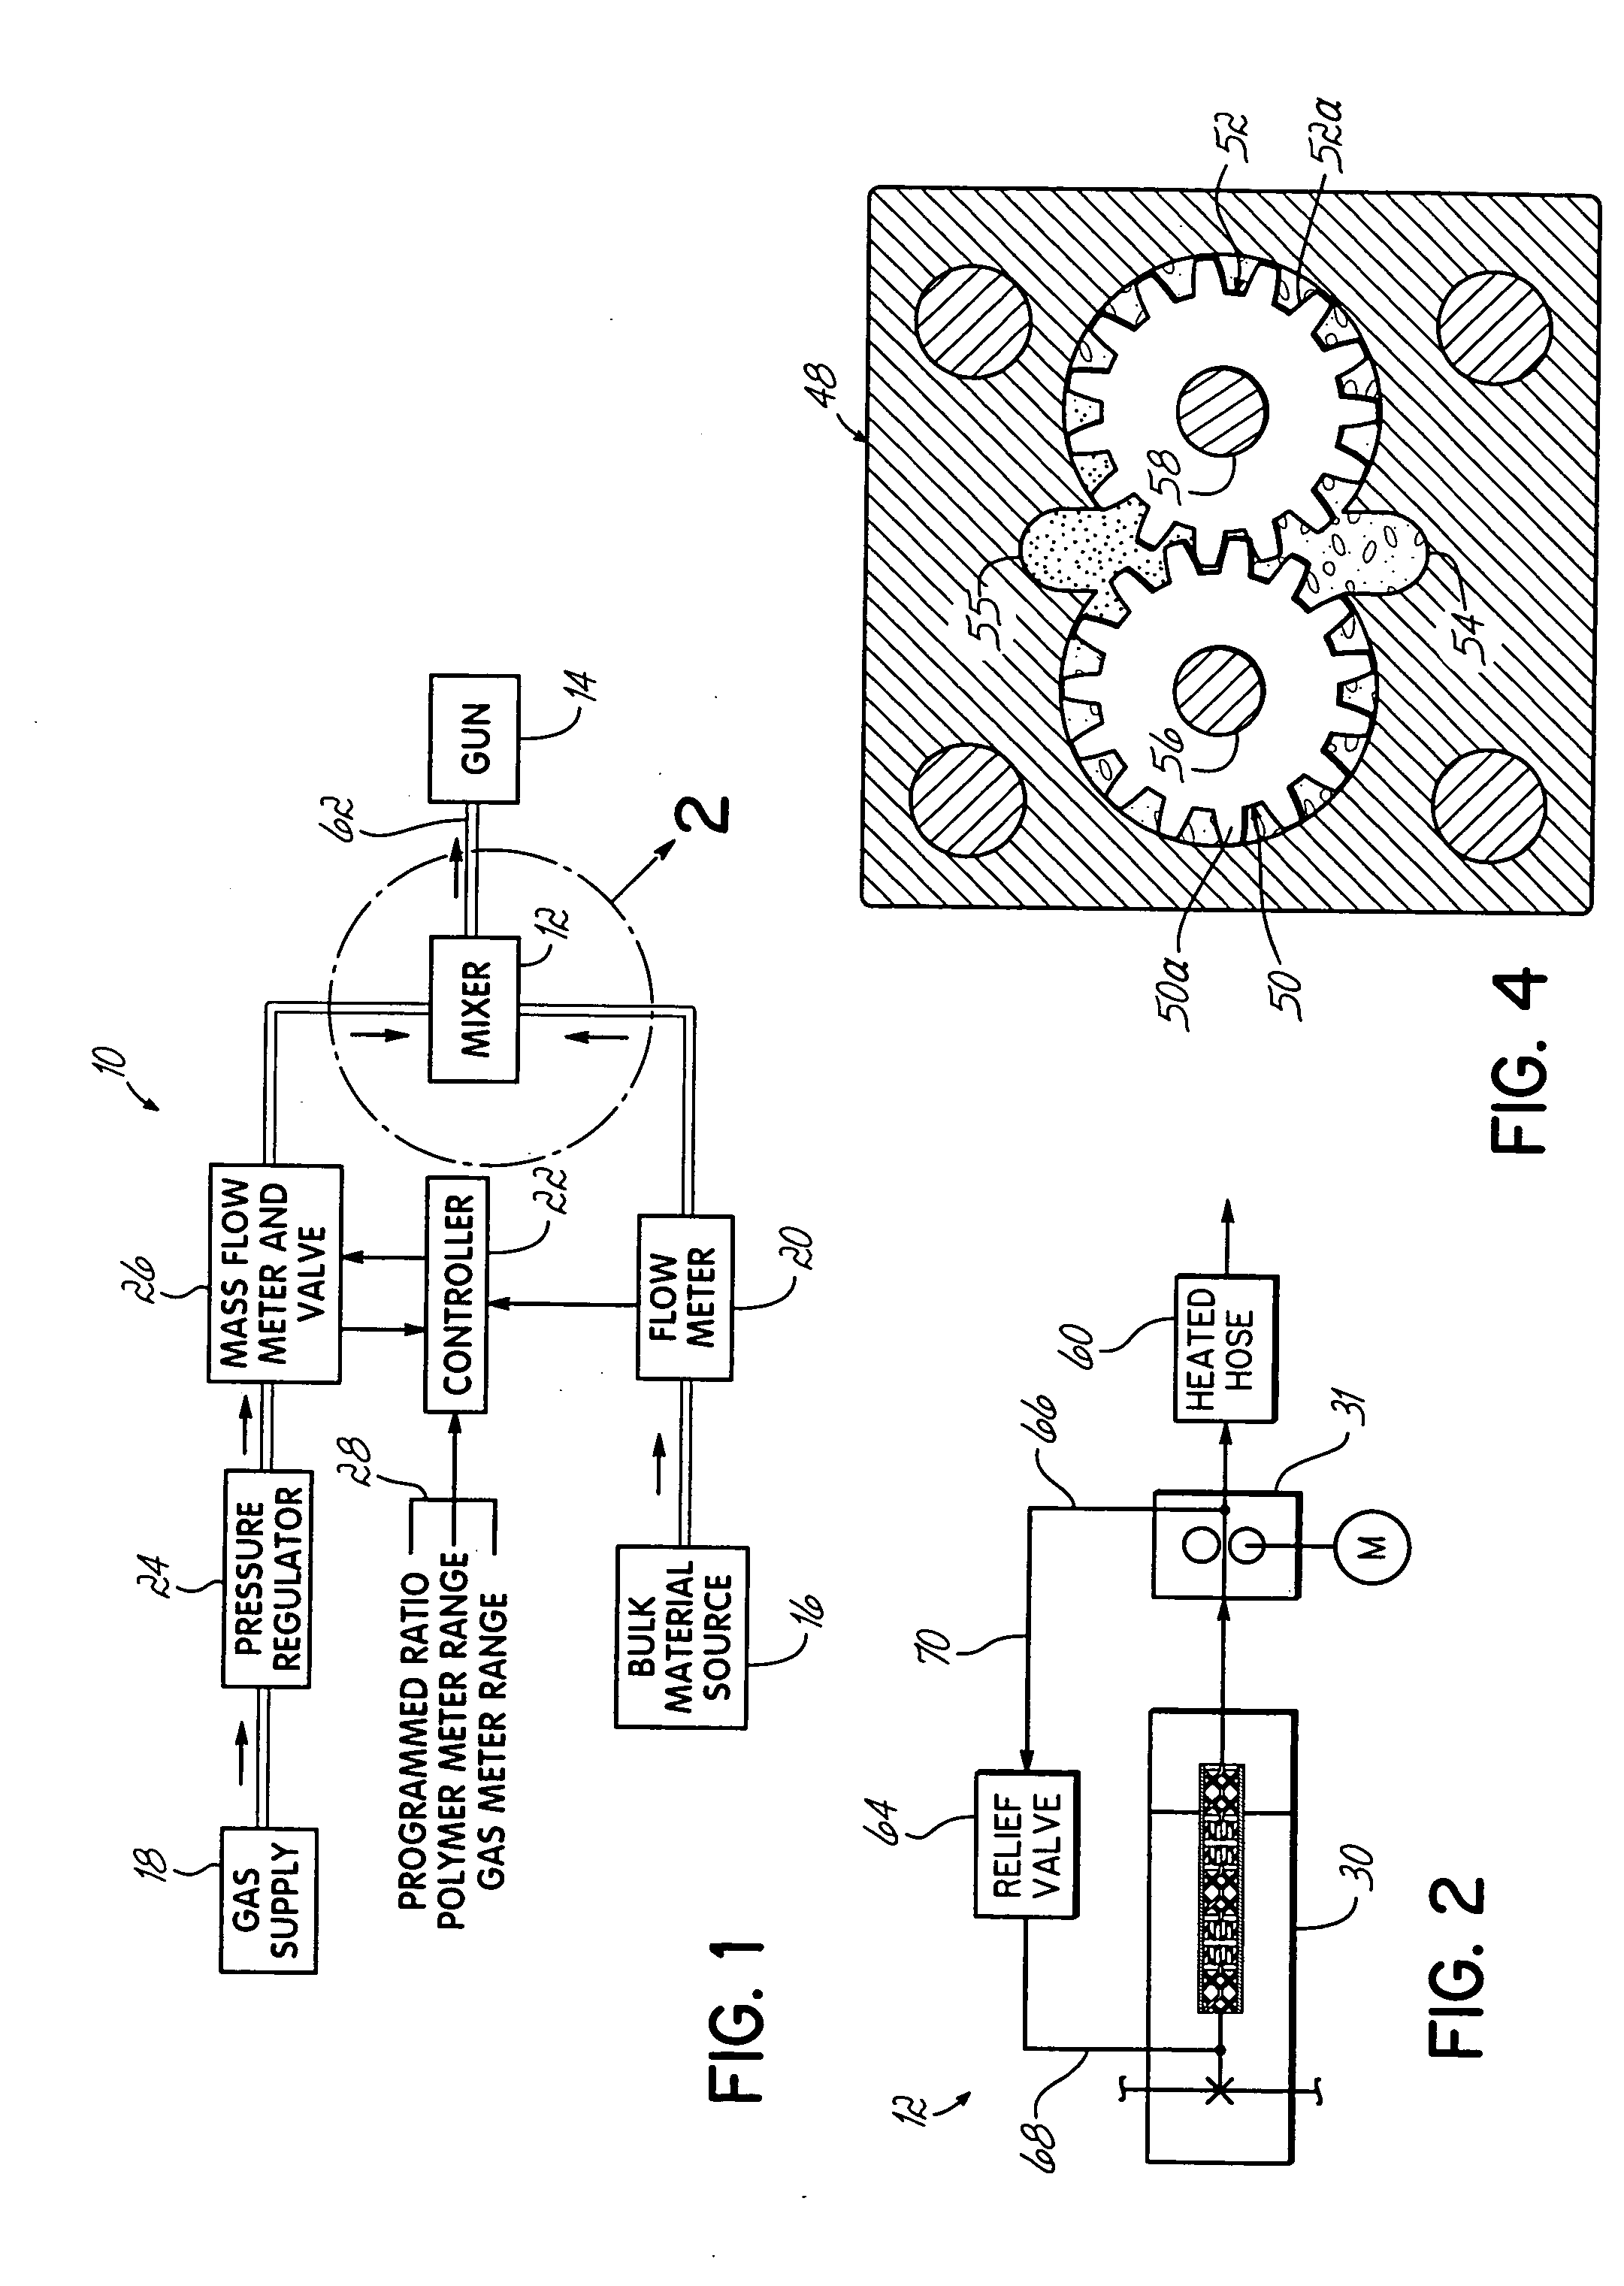 Method and apparatus for producing closed cell foam